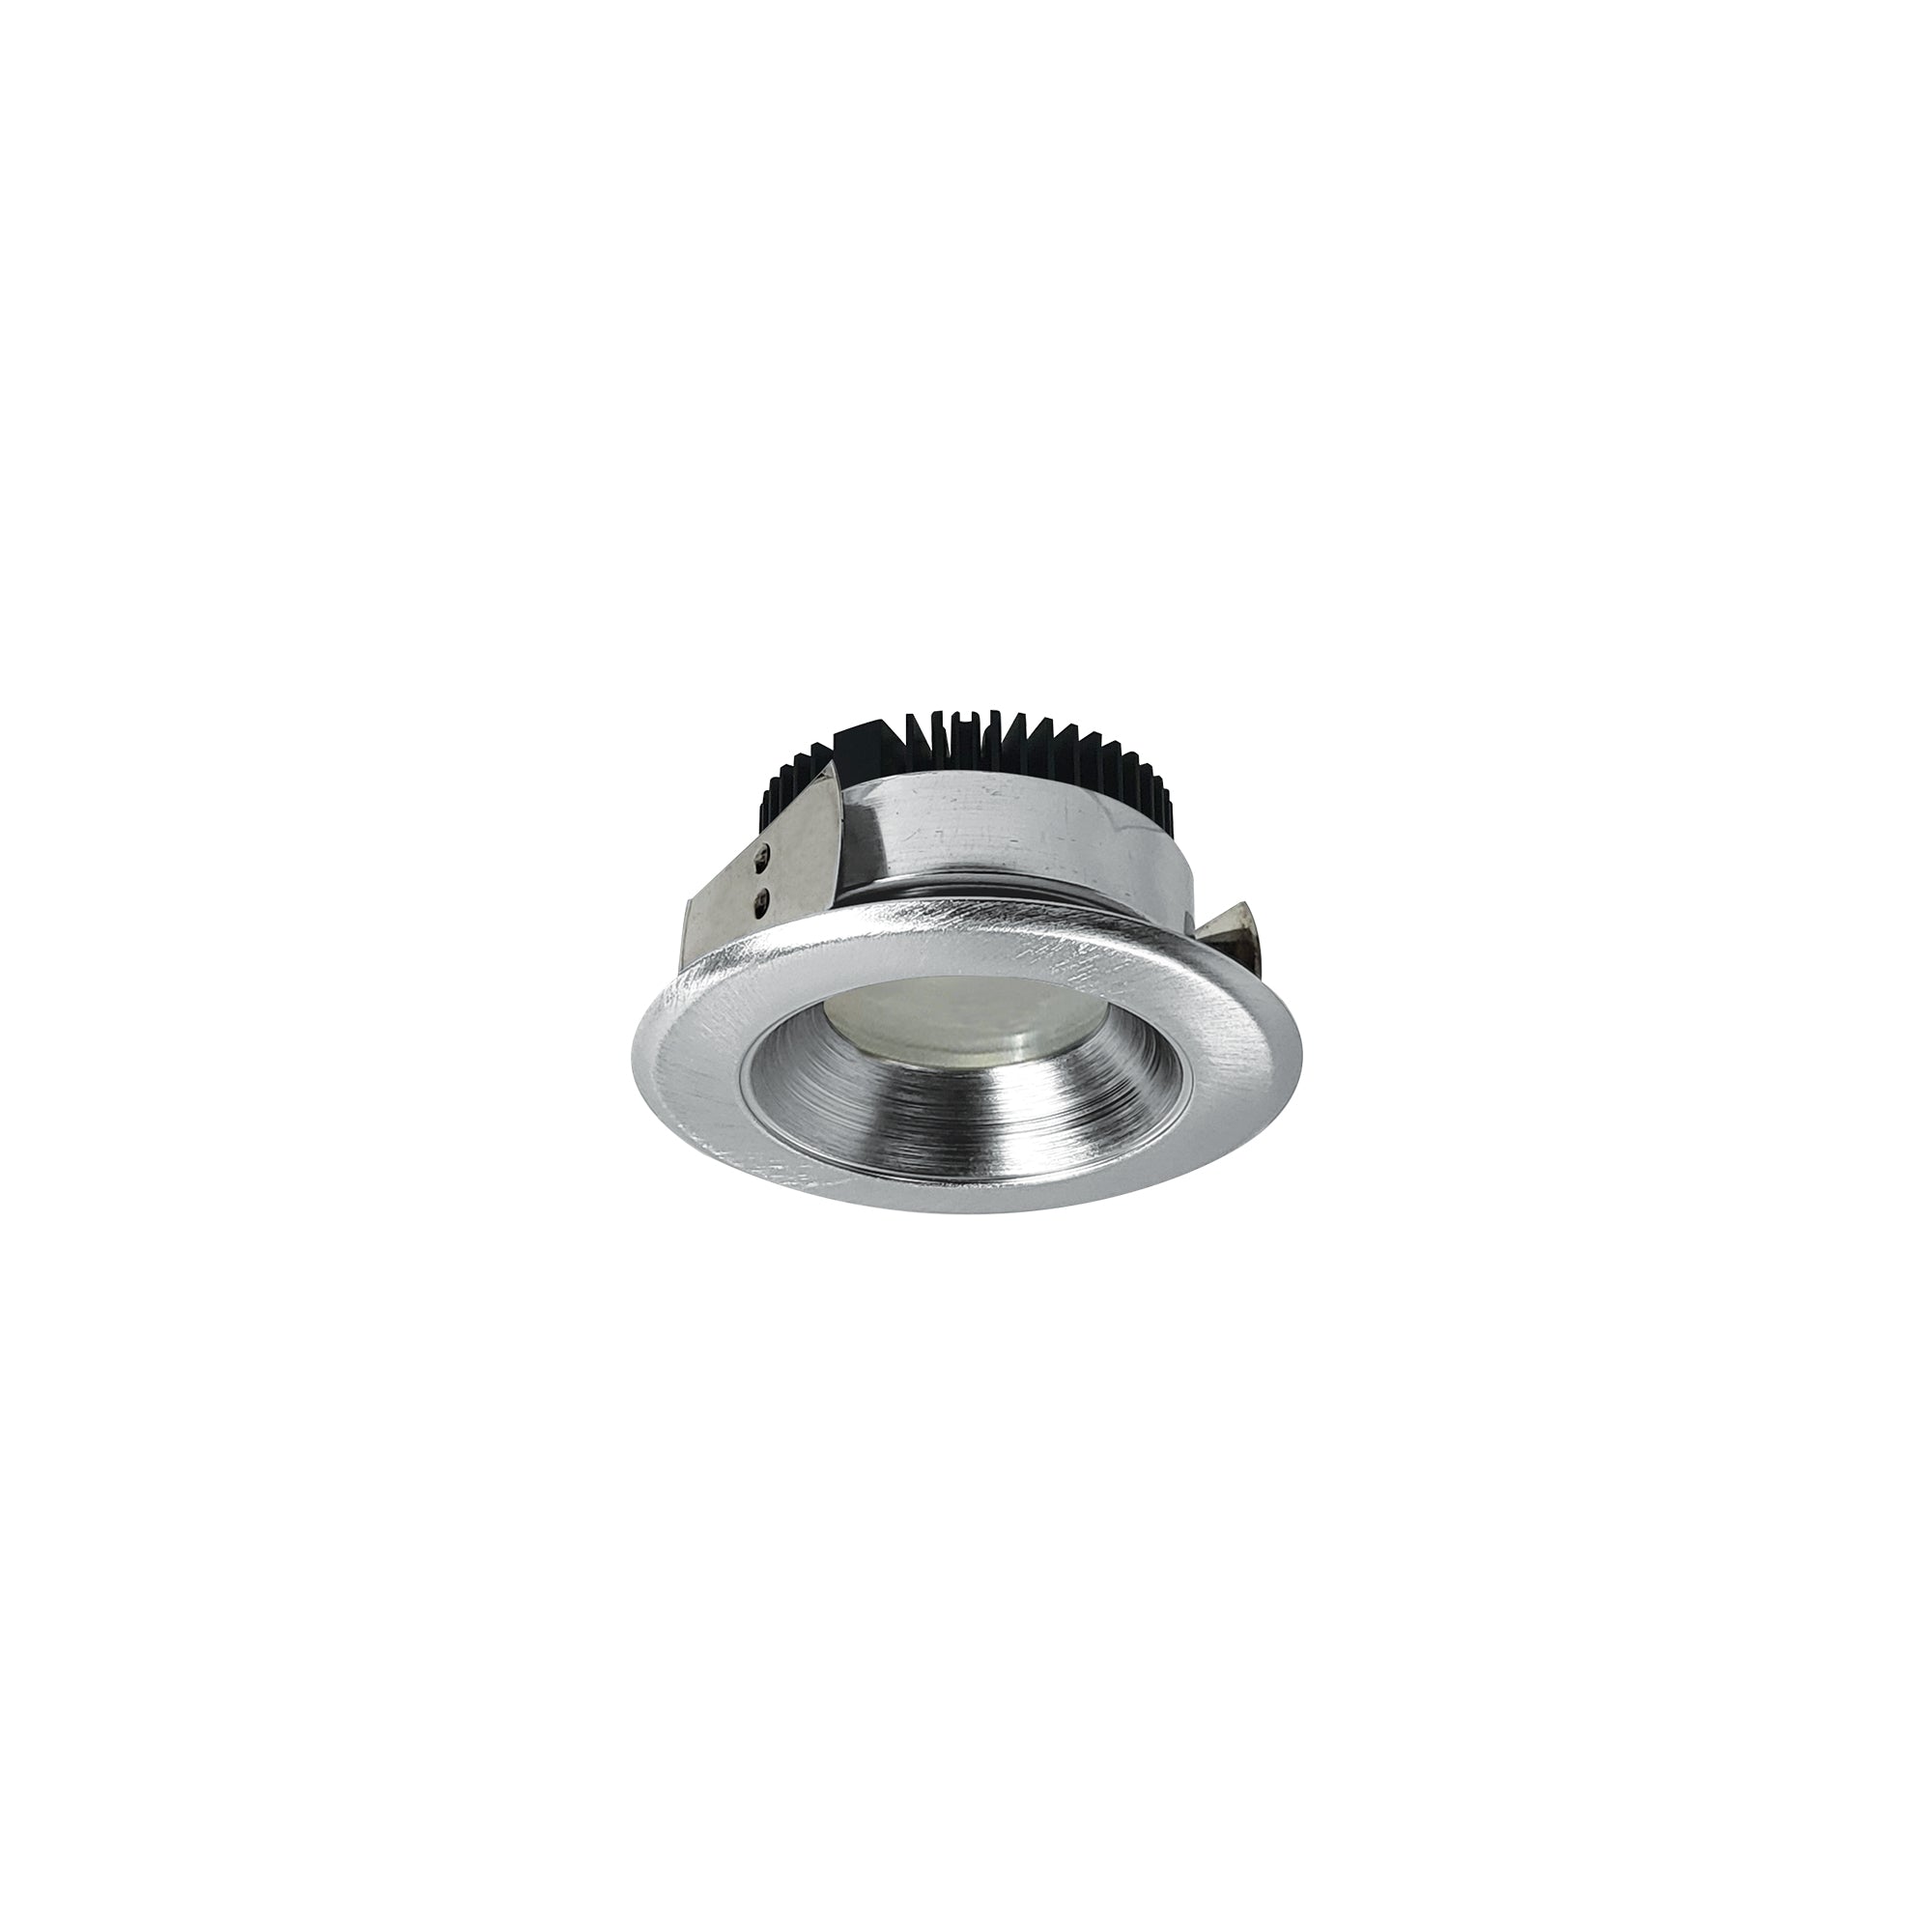 Nora Lighting NRM2-411L0940SNN - Recessed - 4 Inch Marquise II Round Reflector, 900lm, 4000K, Spot, Natural Metal